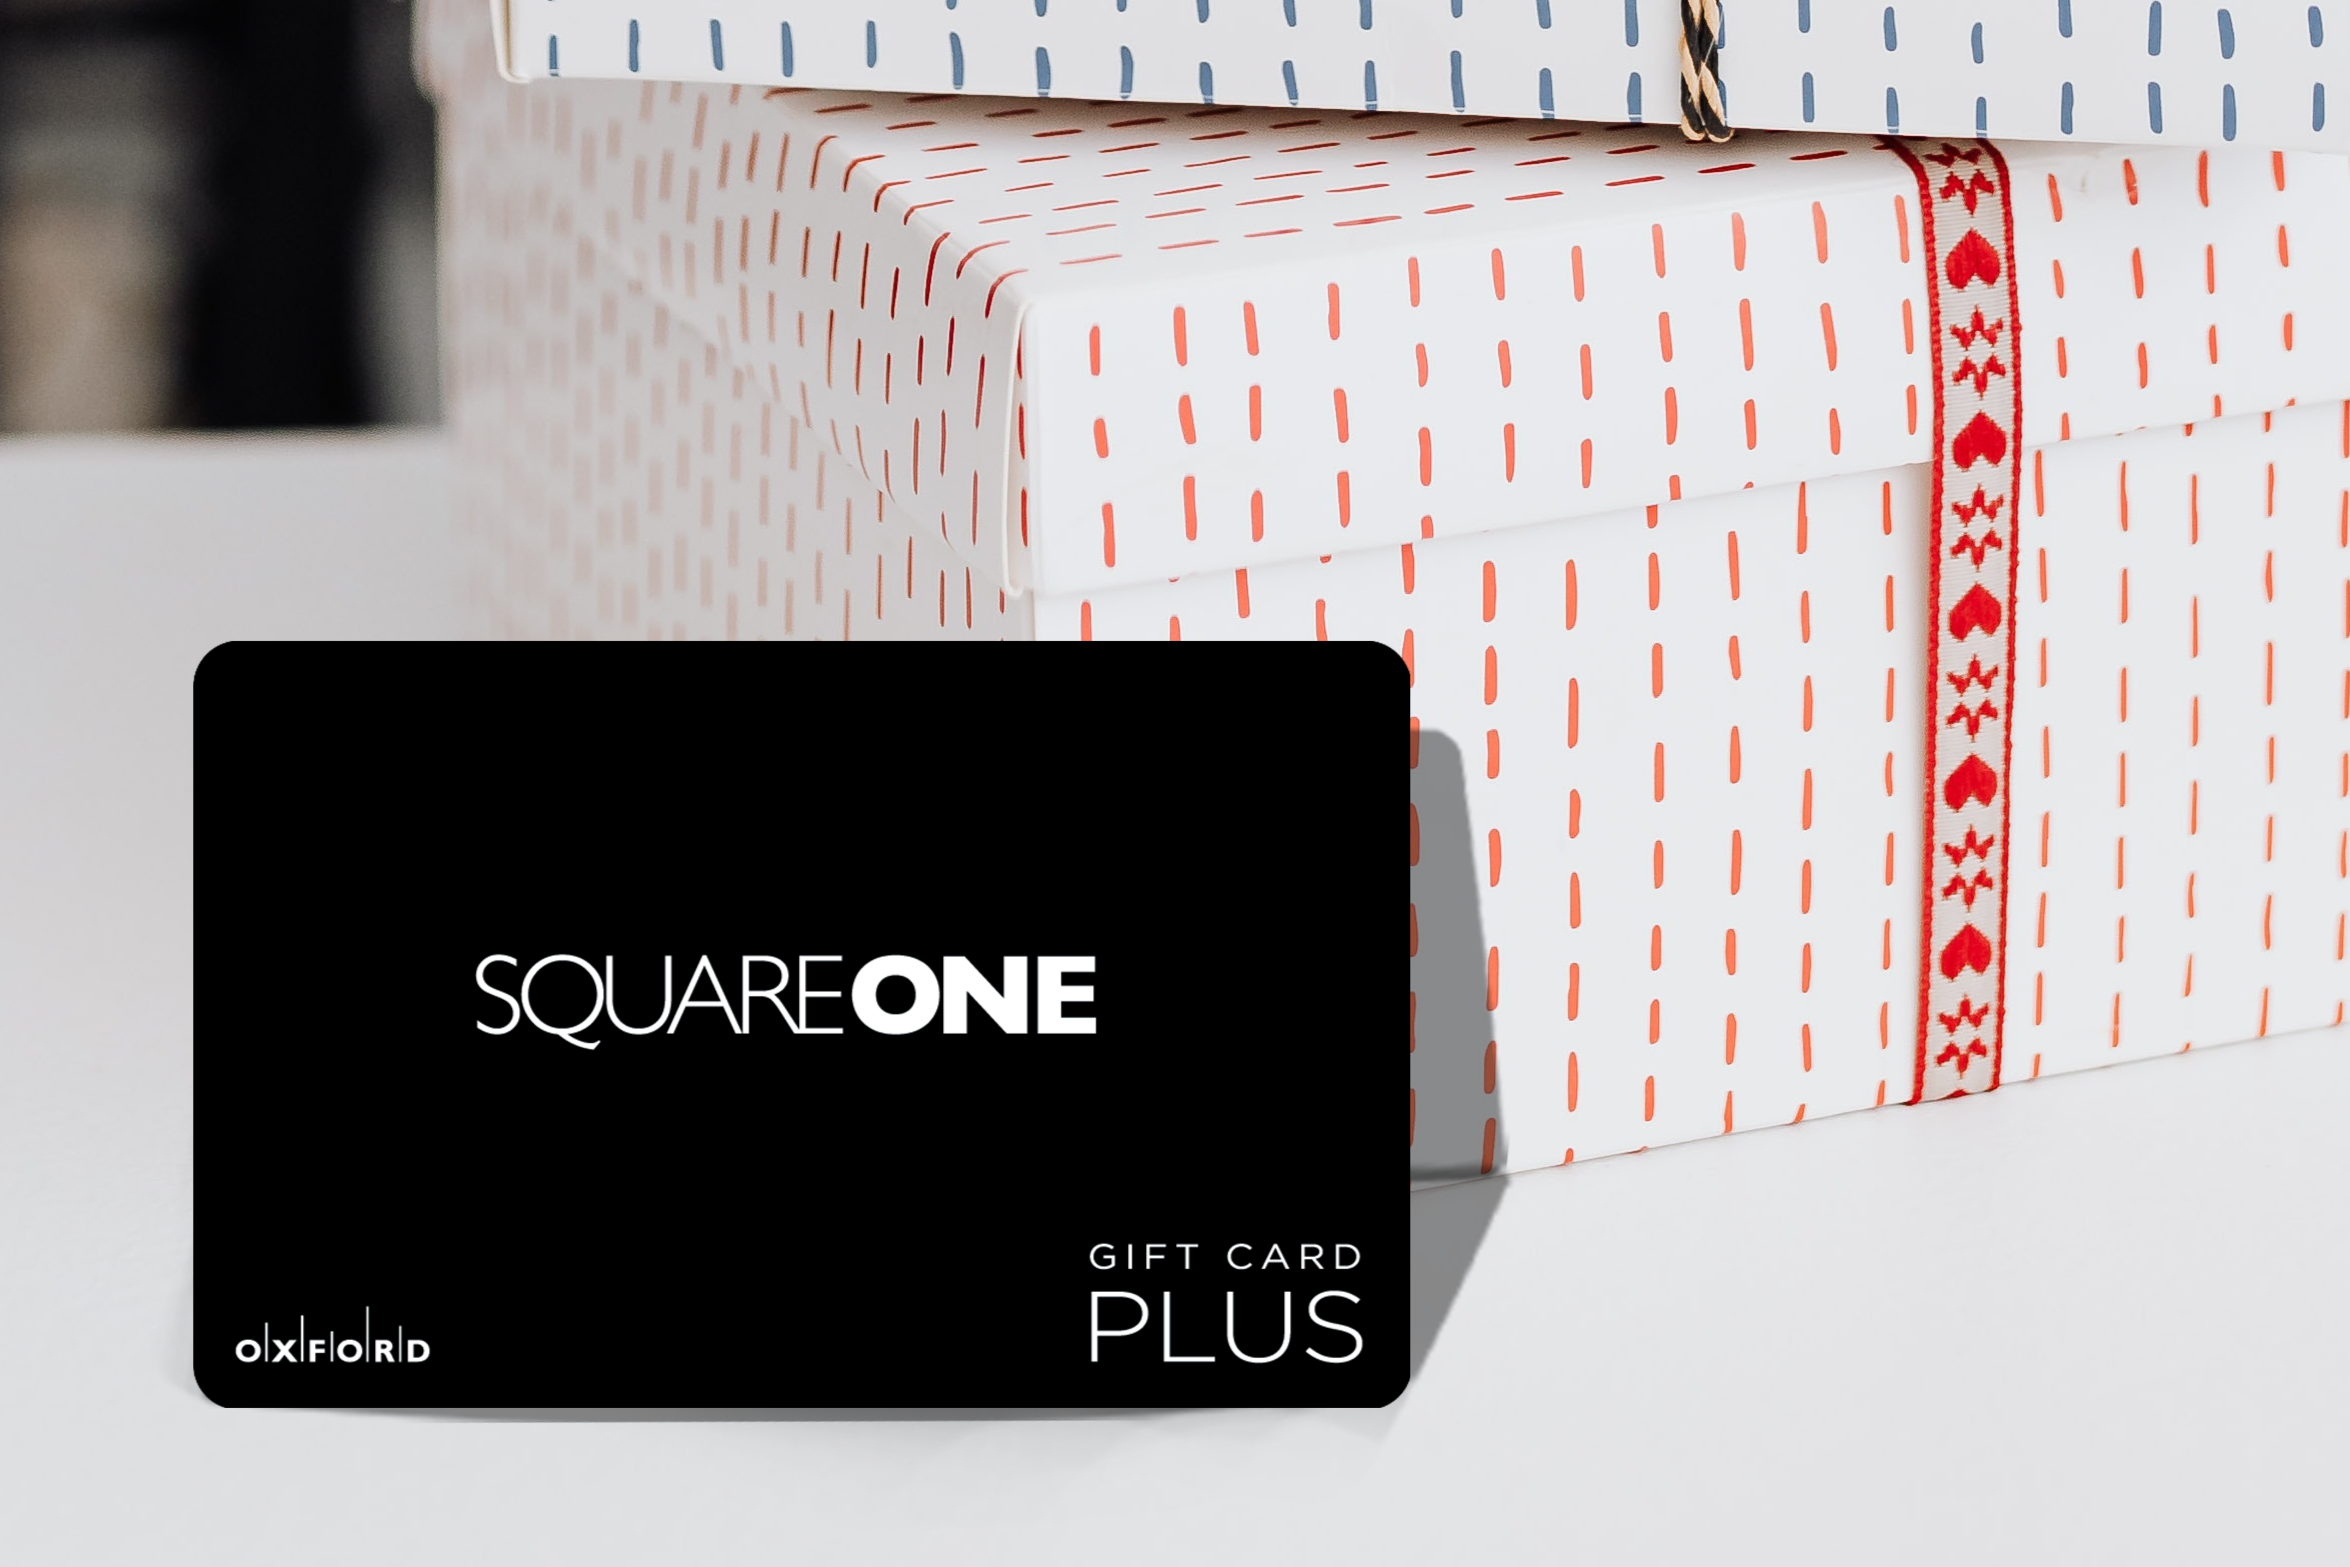 promotional image of a black square one gift card perched in front of gift boxes